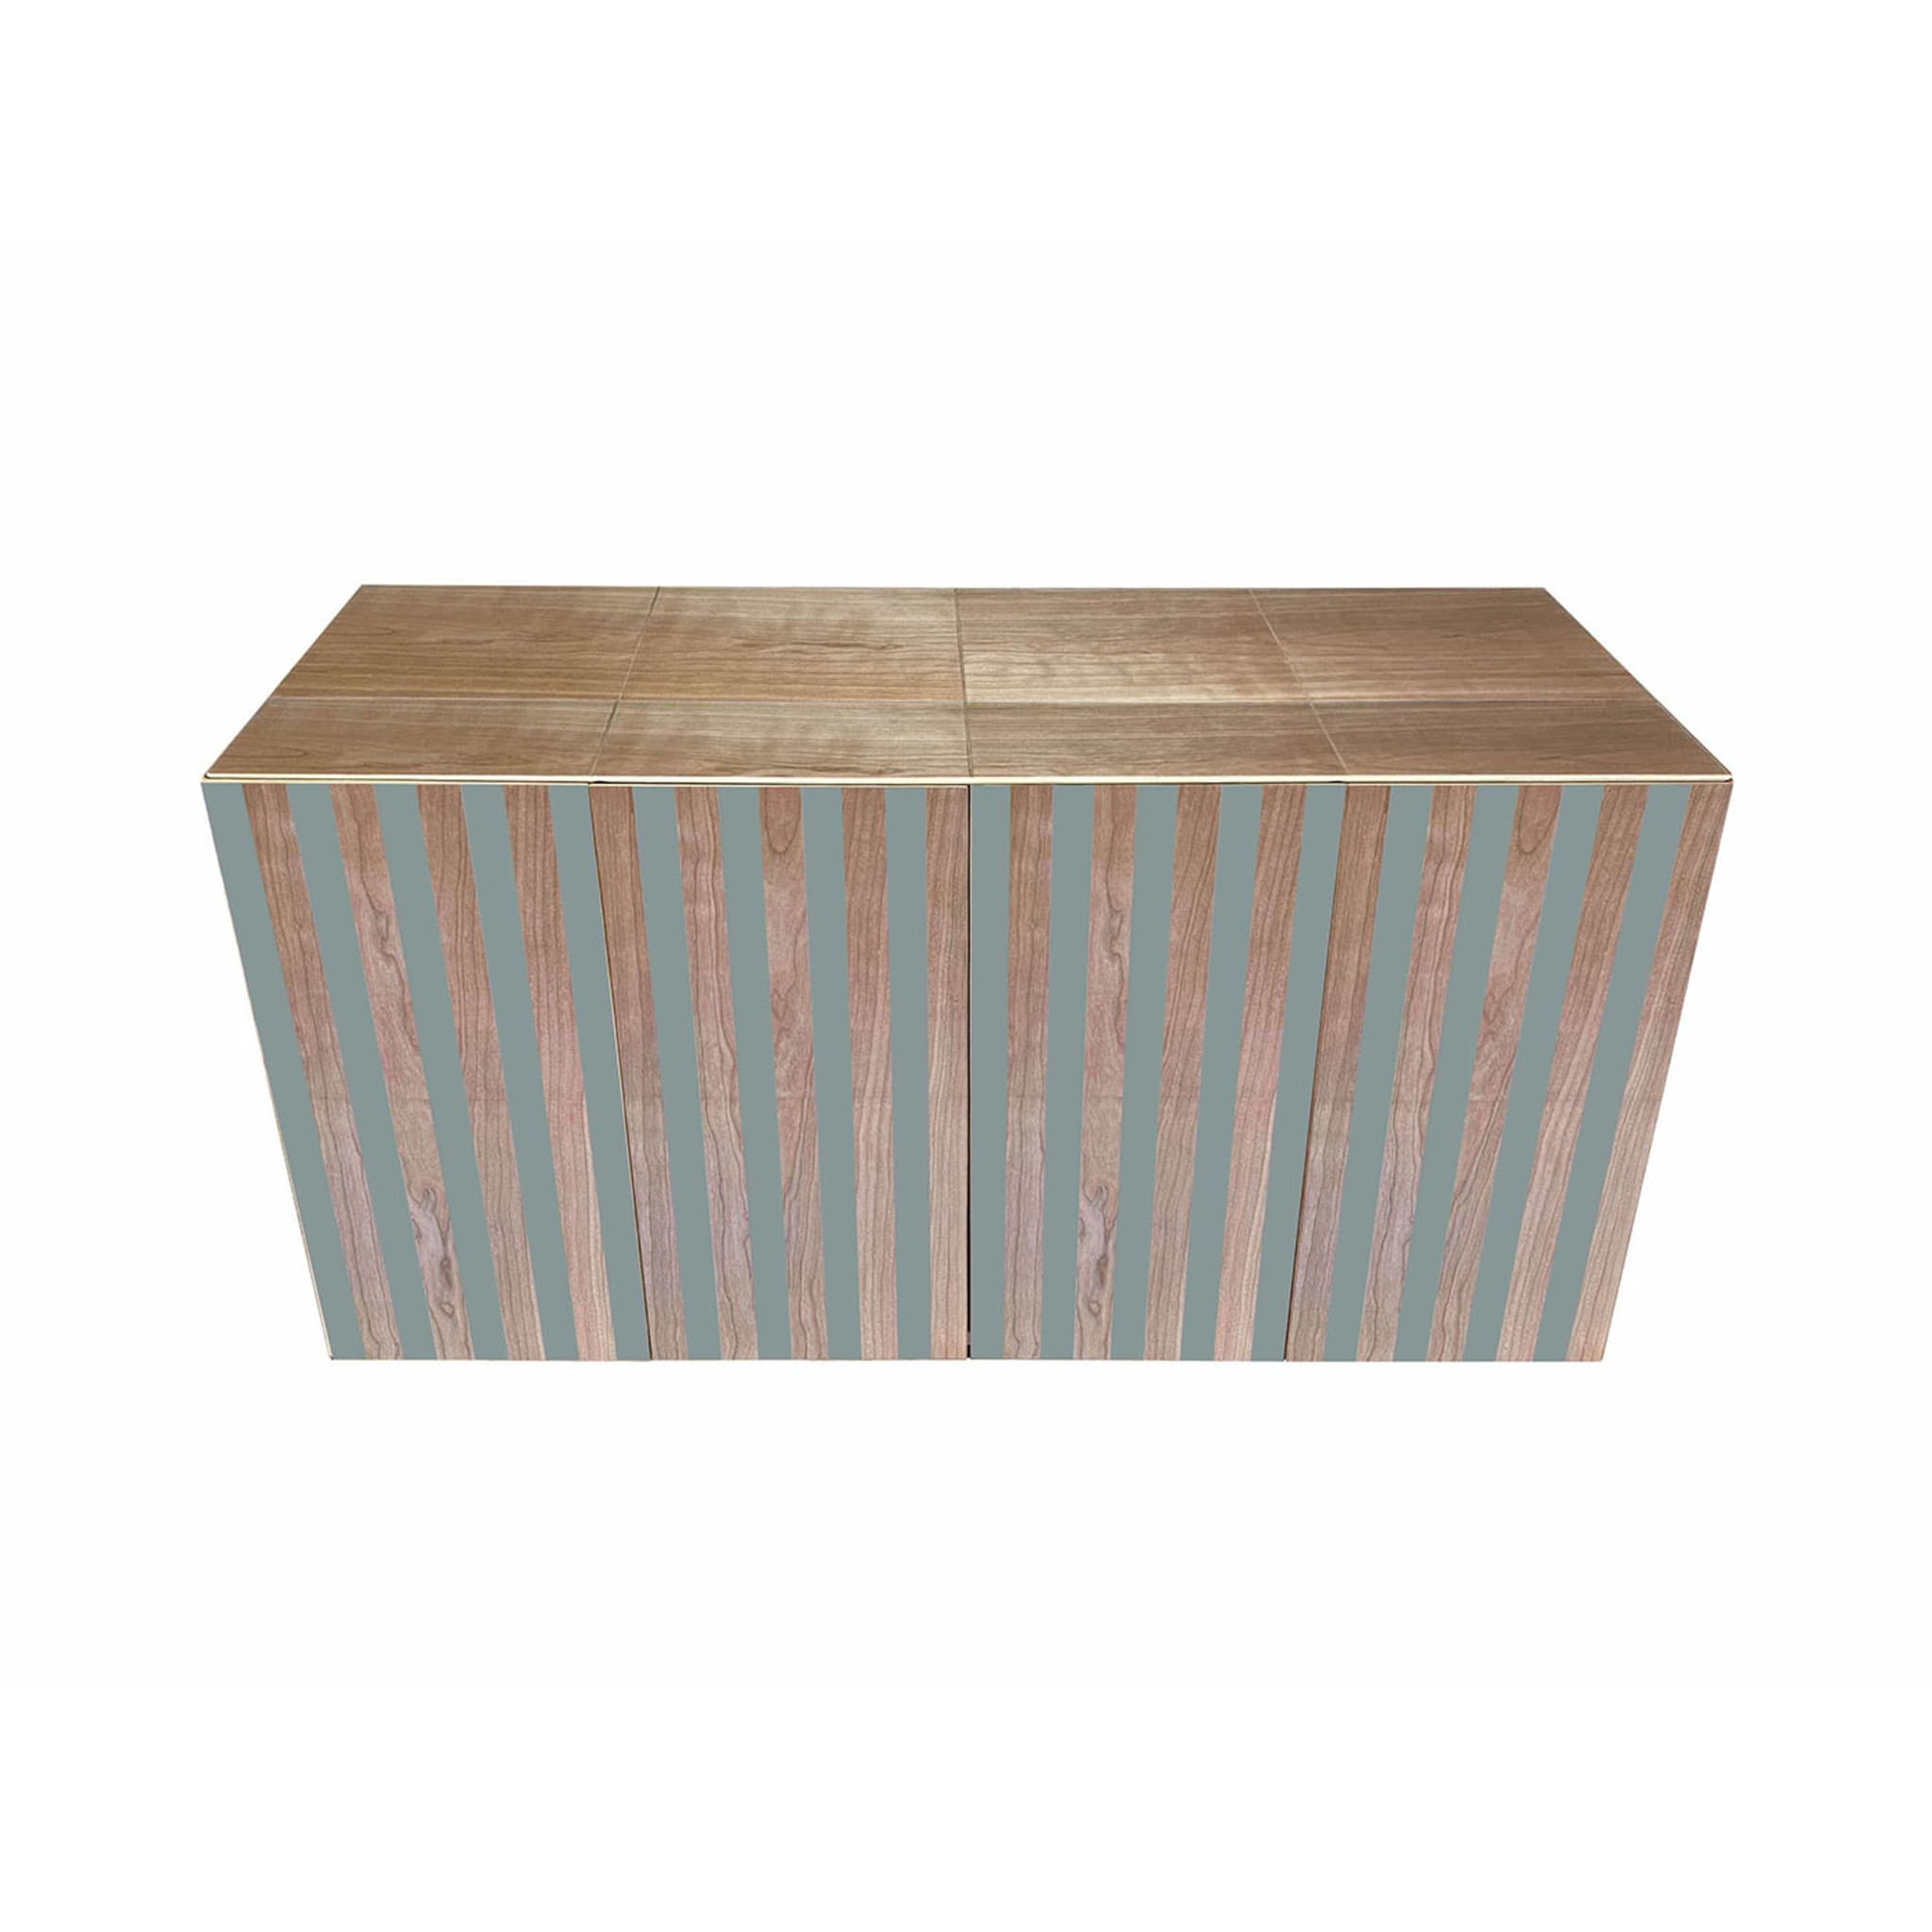 Md3 4-Door Striped Sideboard by Meccani Studio - Alternative view 1